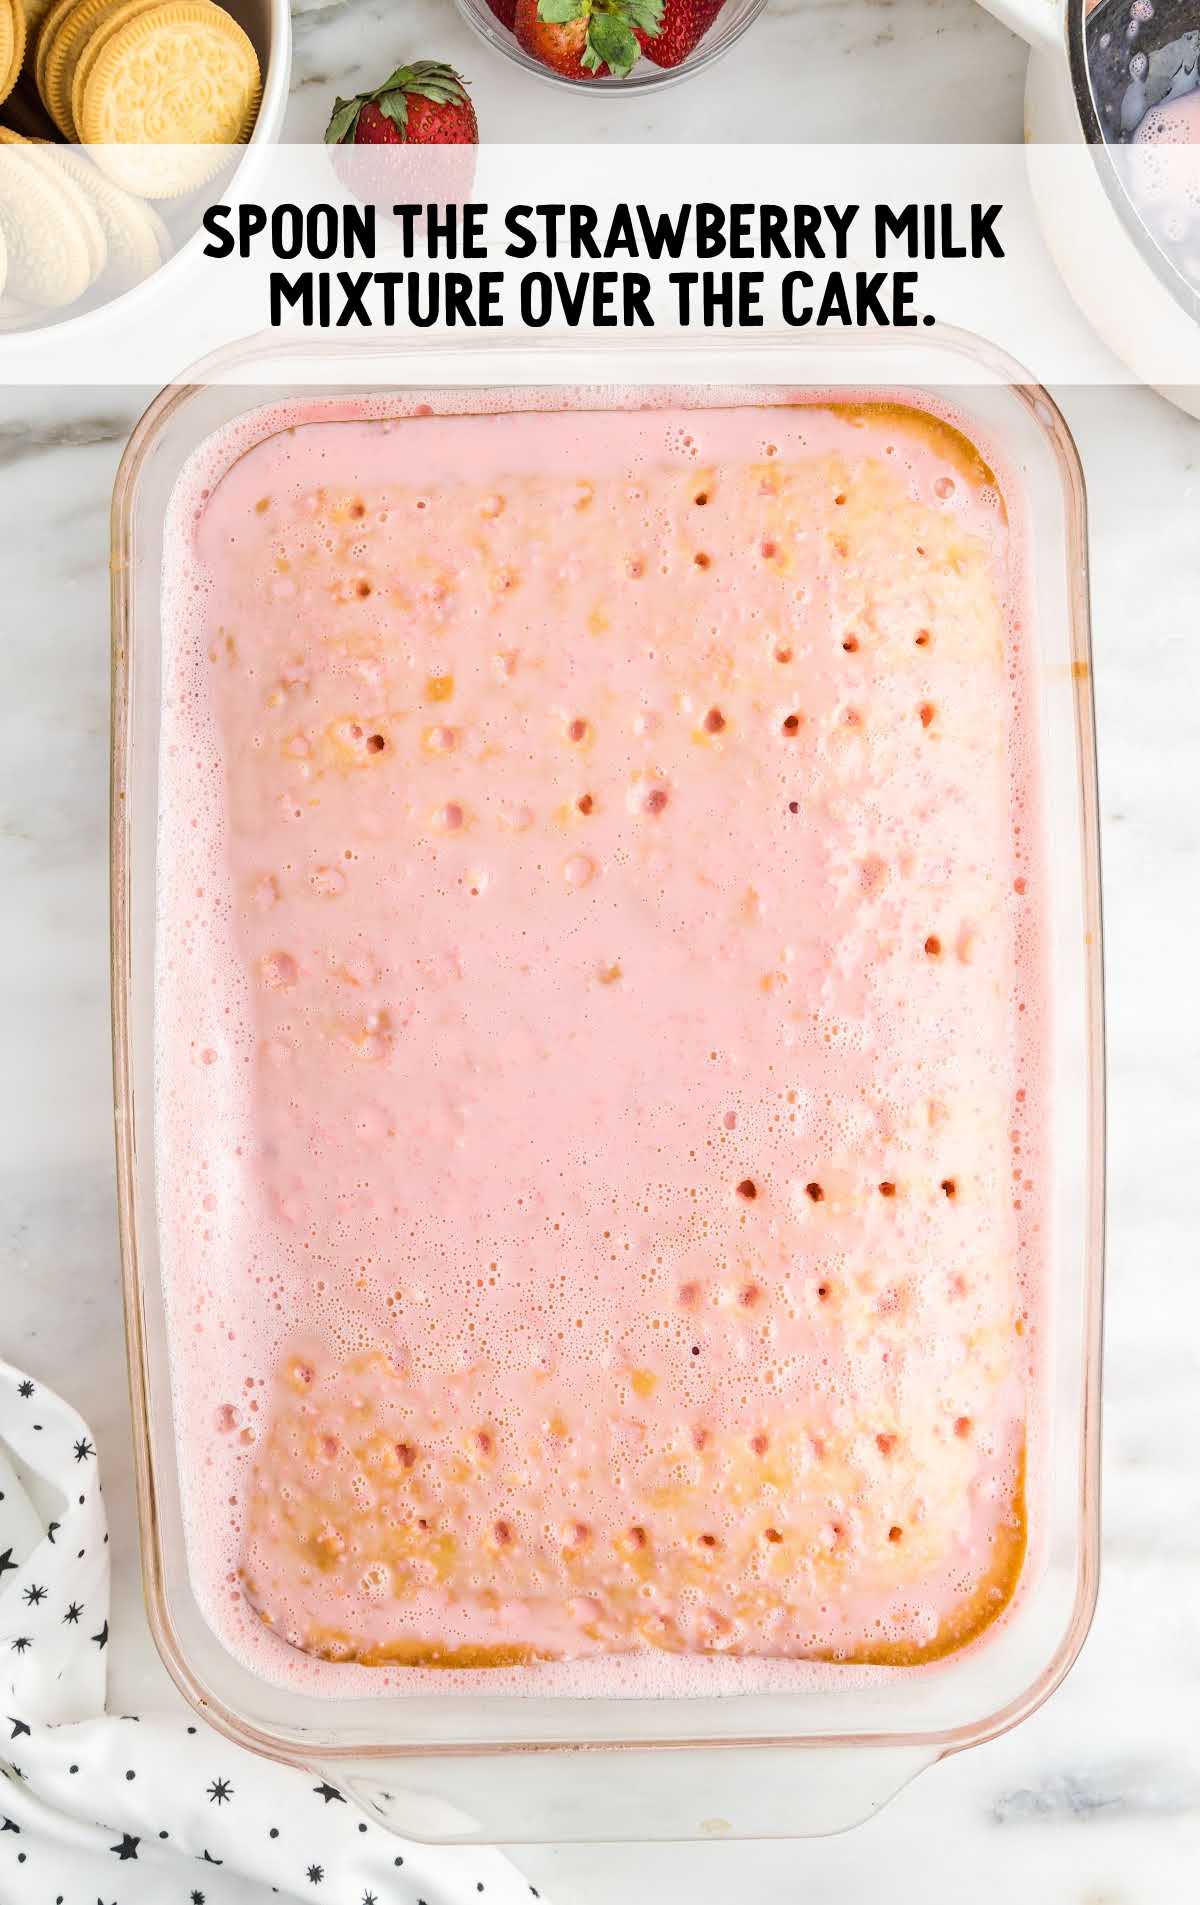 strawberry milk mixture spooned over the cake in a baking dish